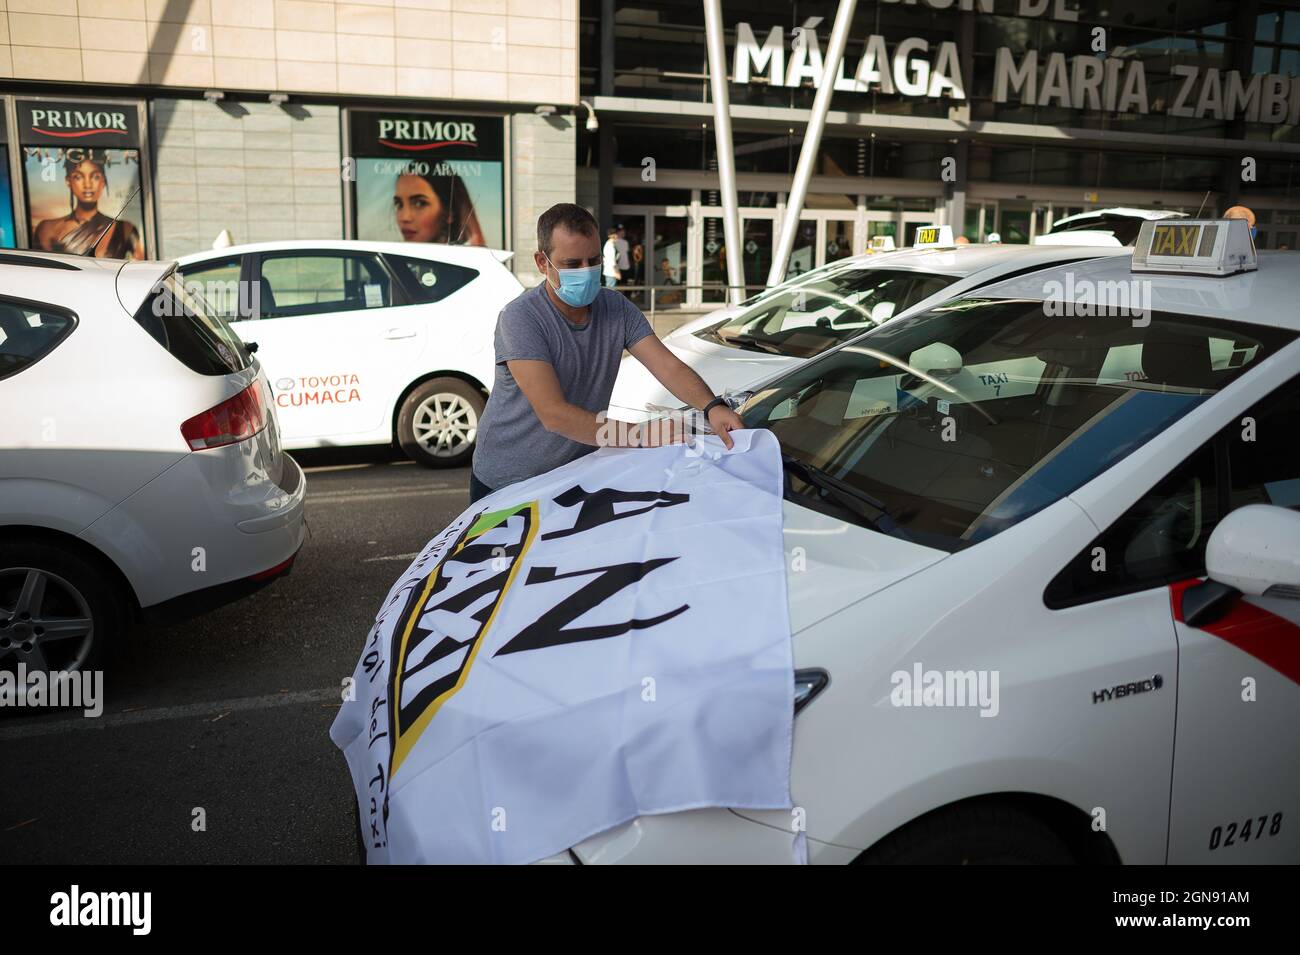 Malaga, Spain. 23rd Sep, 2021. A taxi driver seen placing a flag on his taxi  as he takes part in the protest.Taxi drivers have marched and blocked main  streets in Malaga demanding